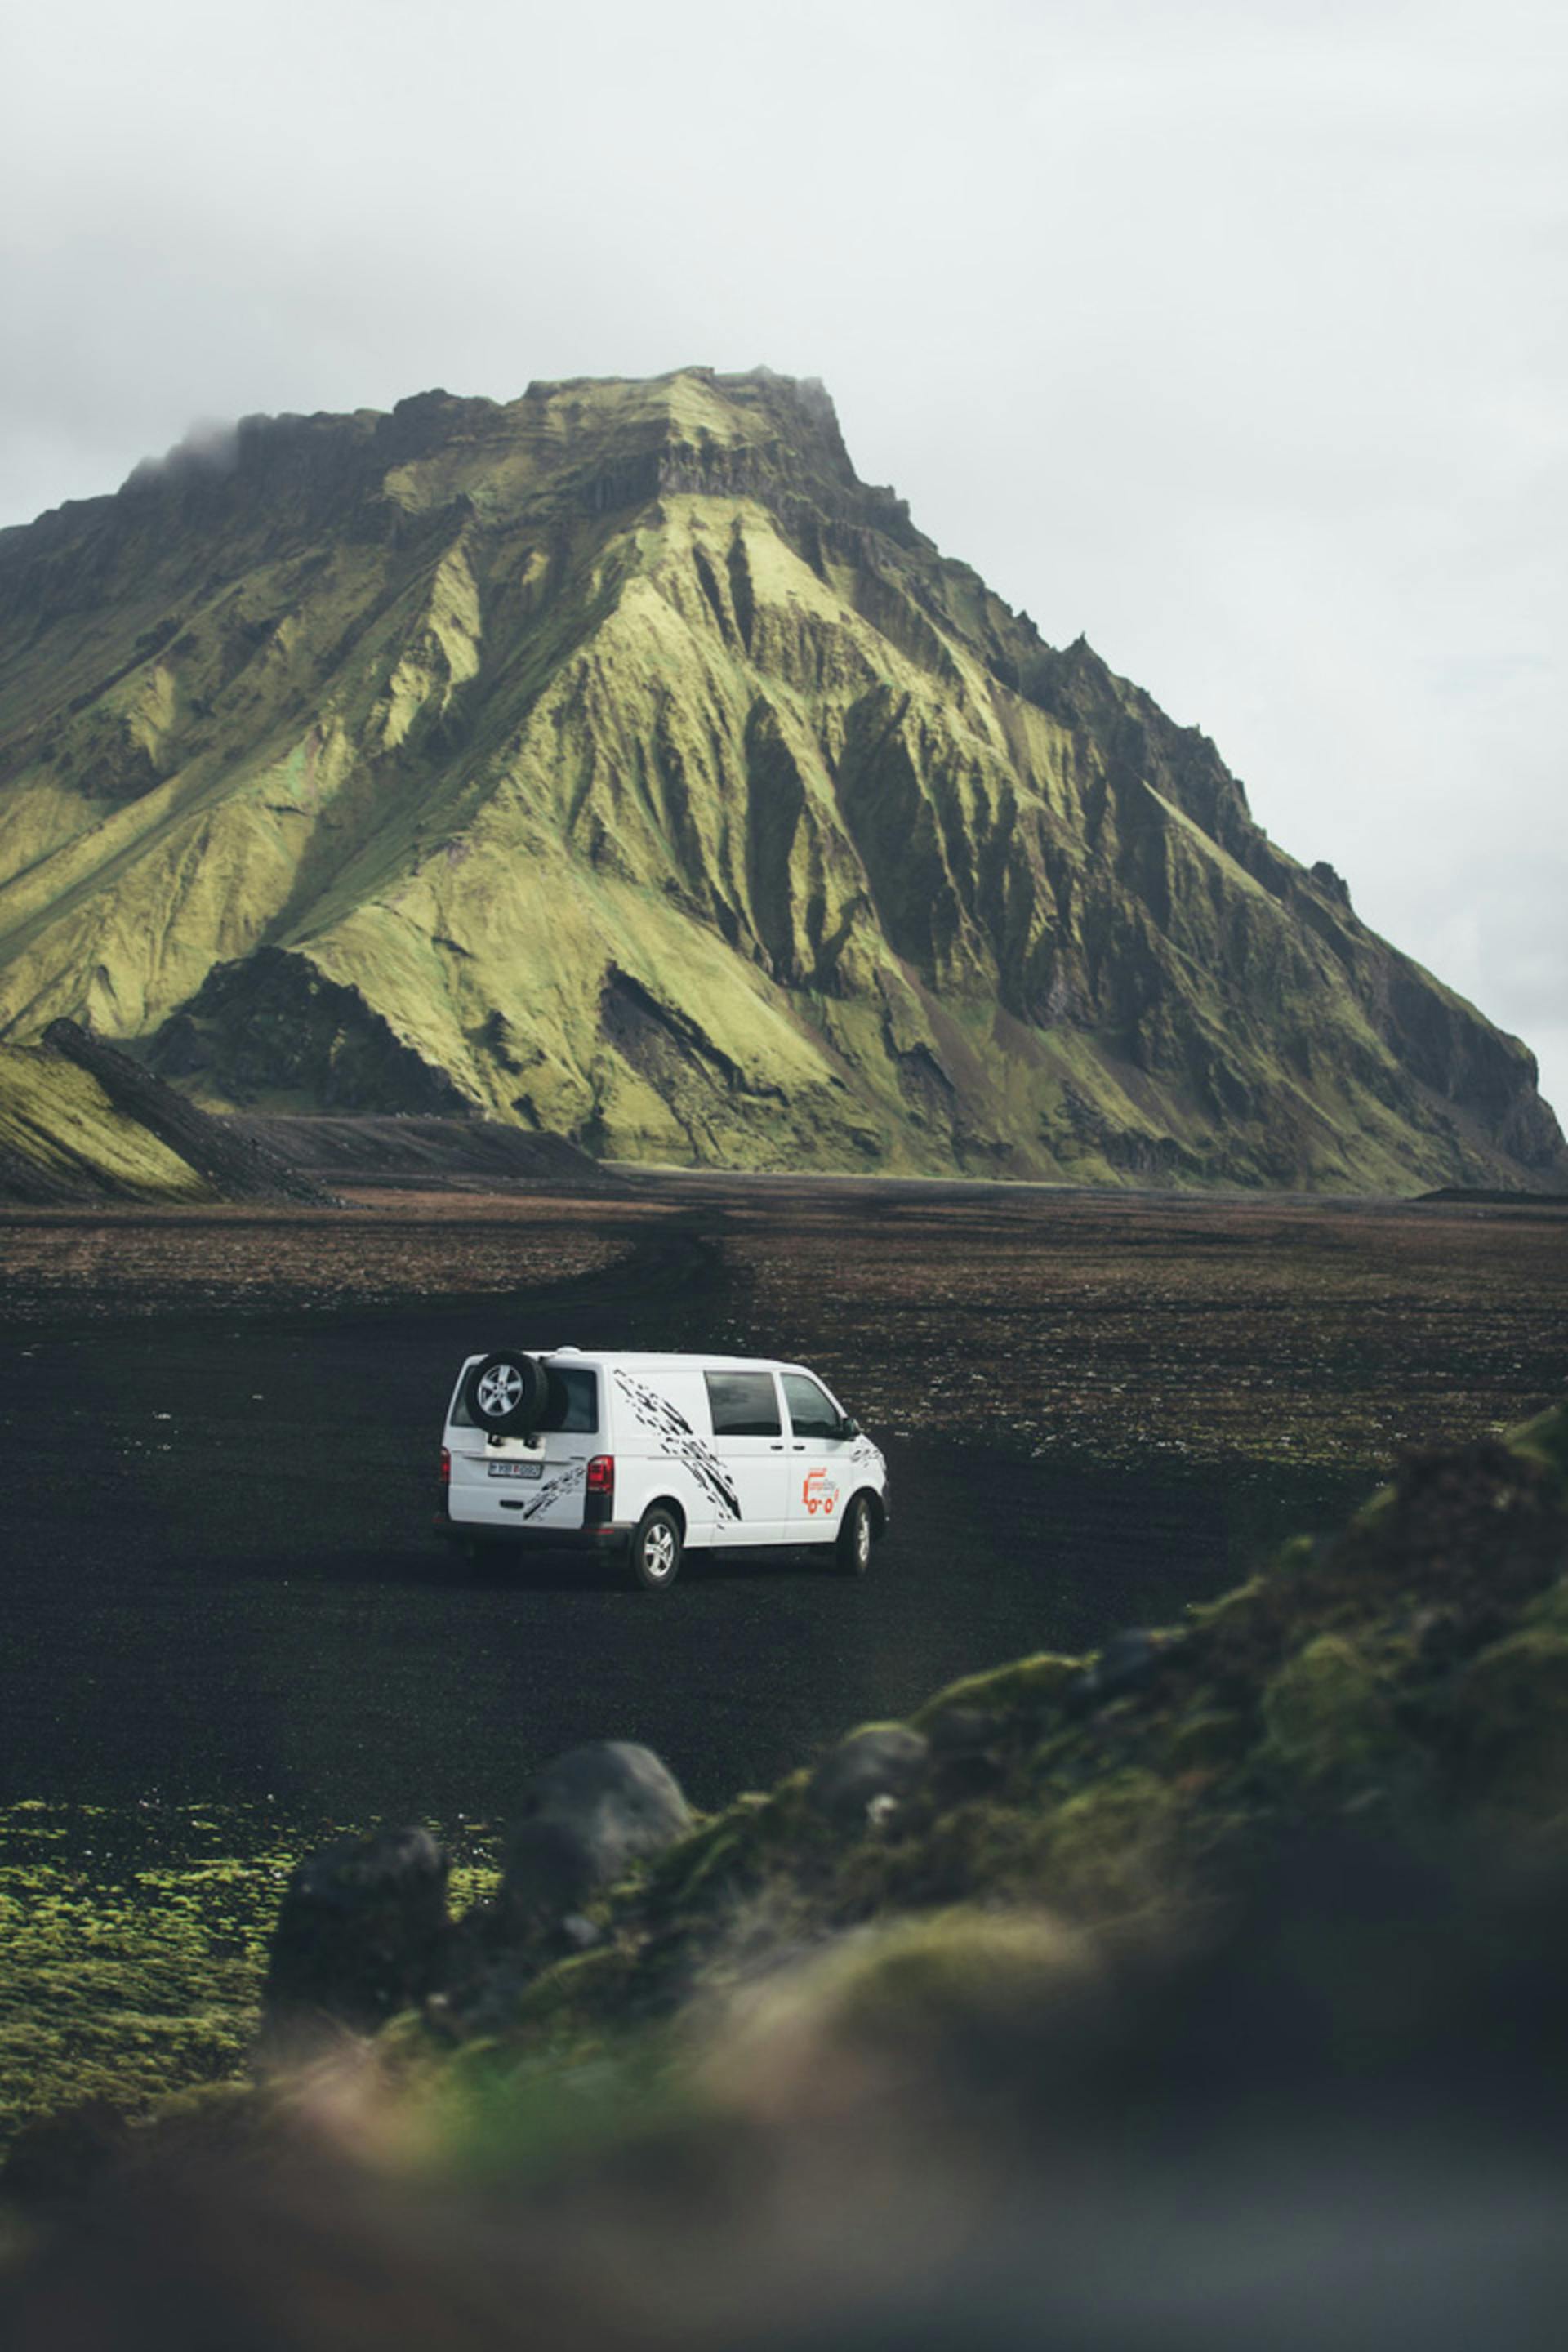 A van sits below a green monumental mountain in Iceland.